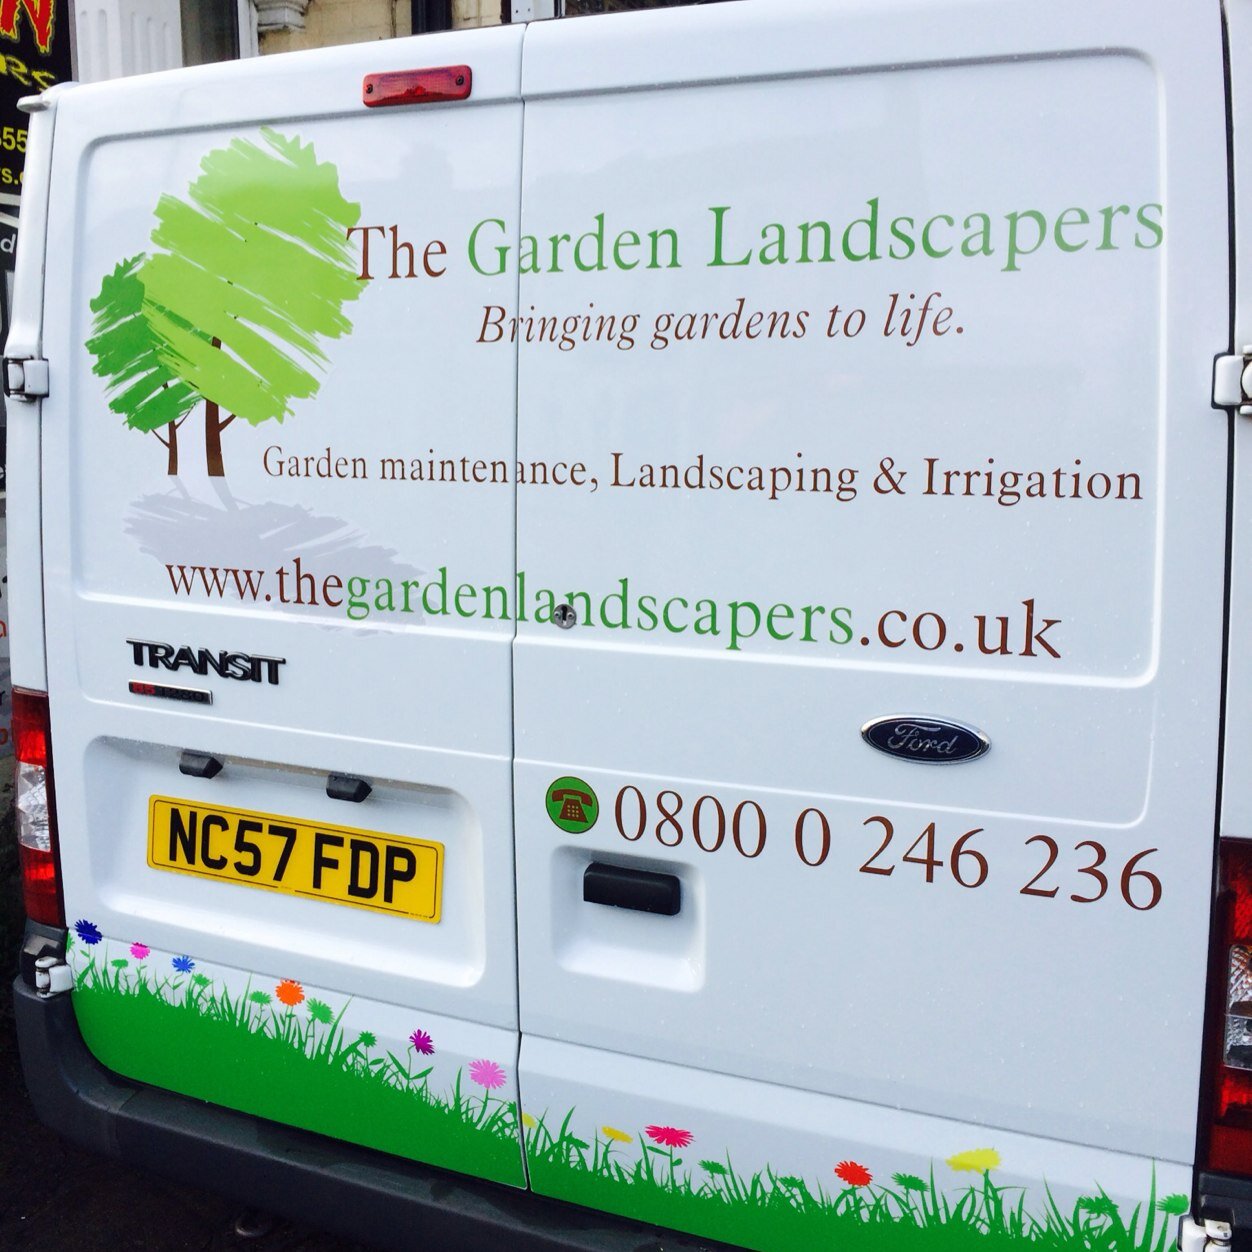 We are The Garden Landscapers. We provide garden landscaping, maintenance & irrigation services. Please visit our website http://t.co/69YzacrgmU